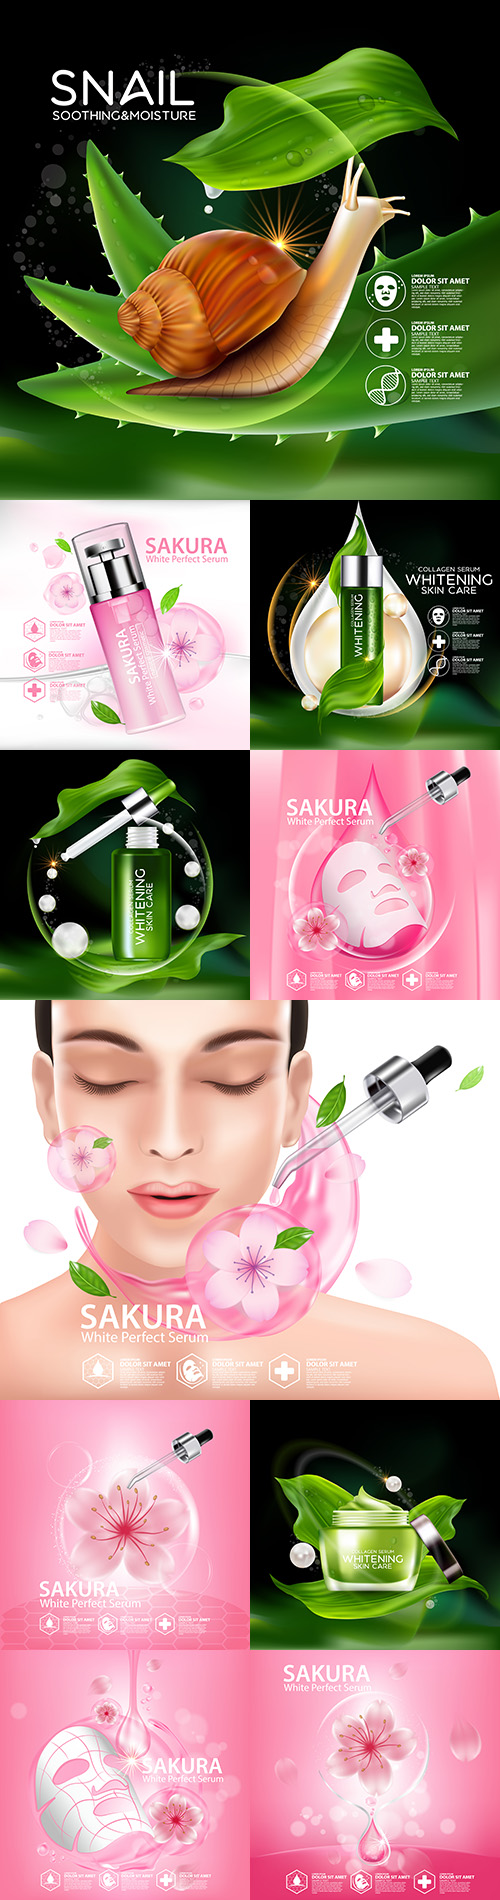 Skin care cosmetics with natural ingredients is realistic illustration
